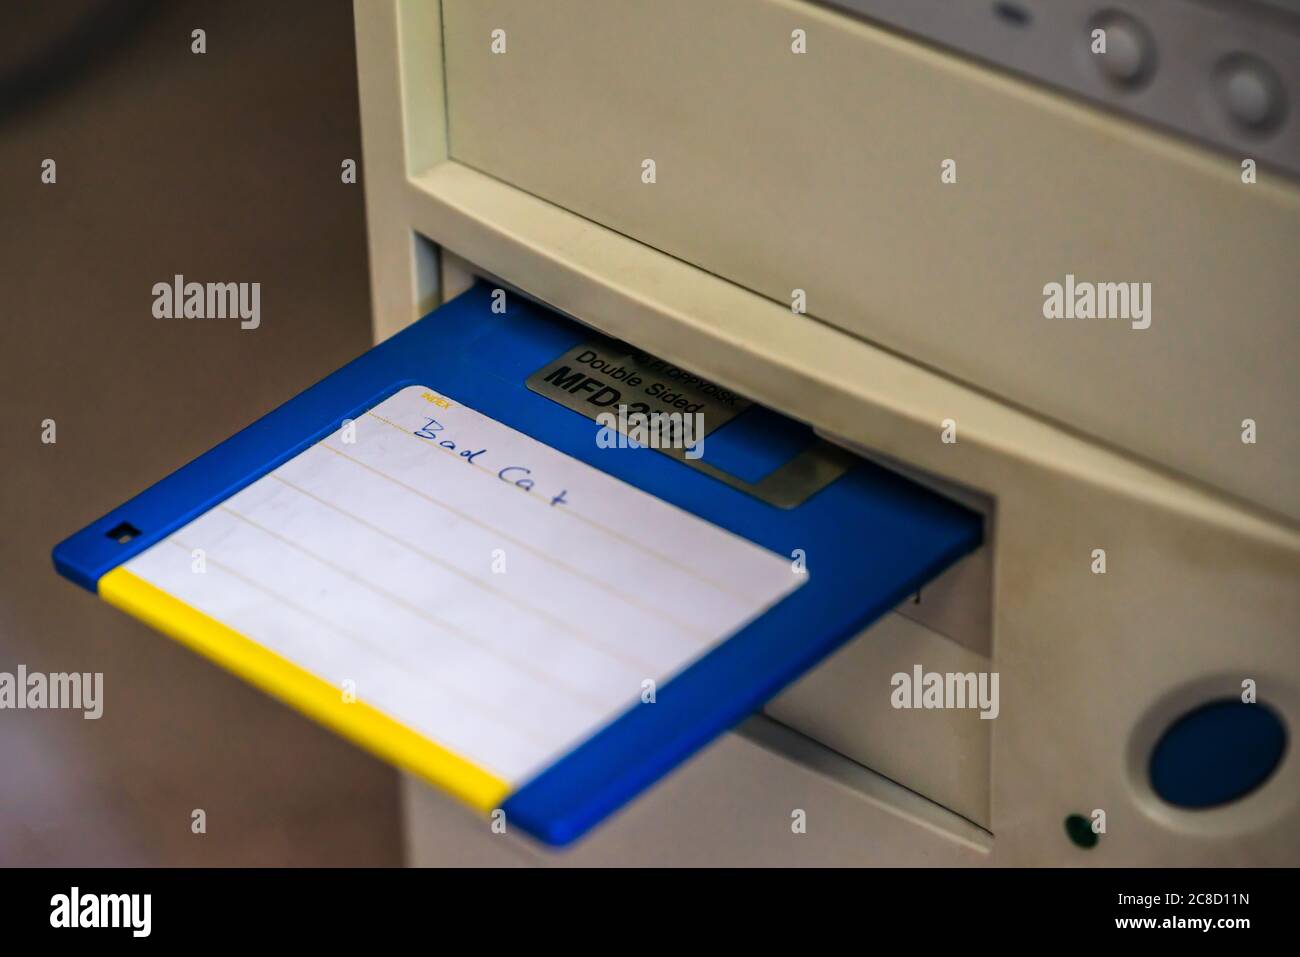 An old obsolete floppy disk inserted into a PC / computer drive Stock Photo